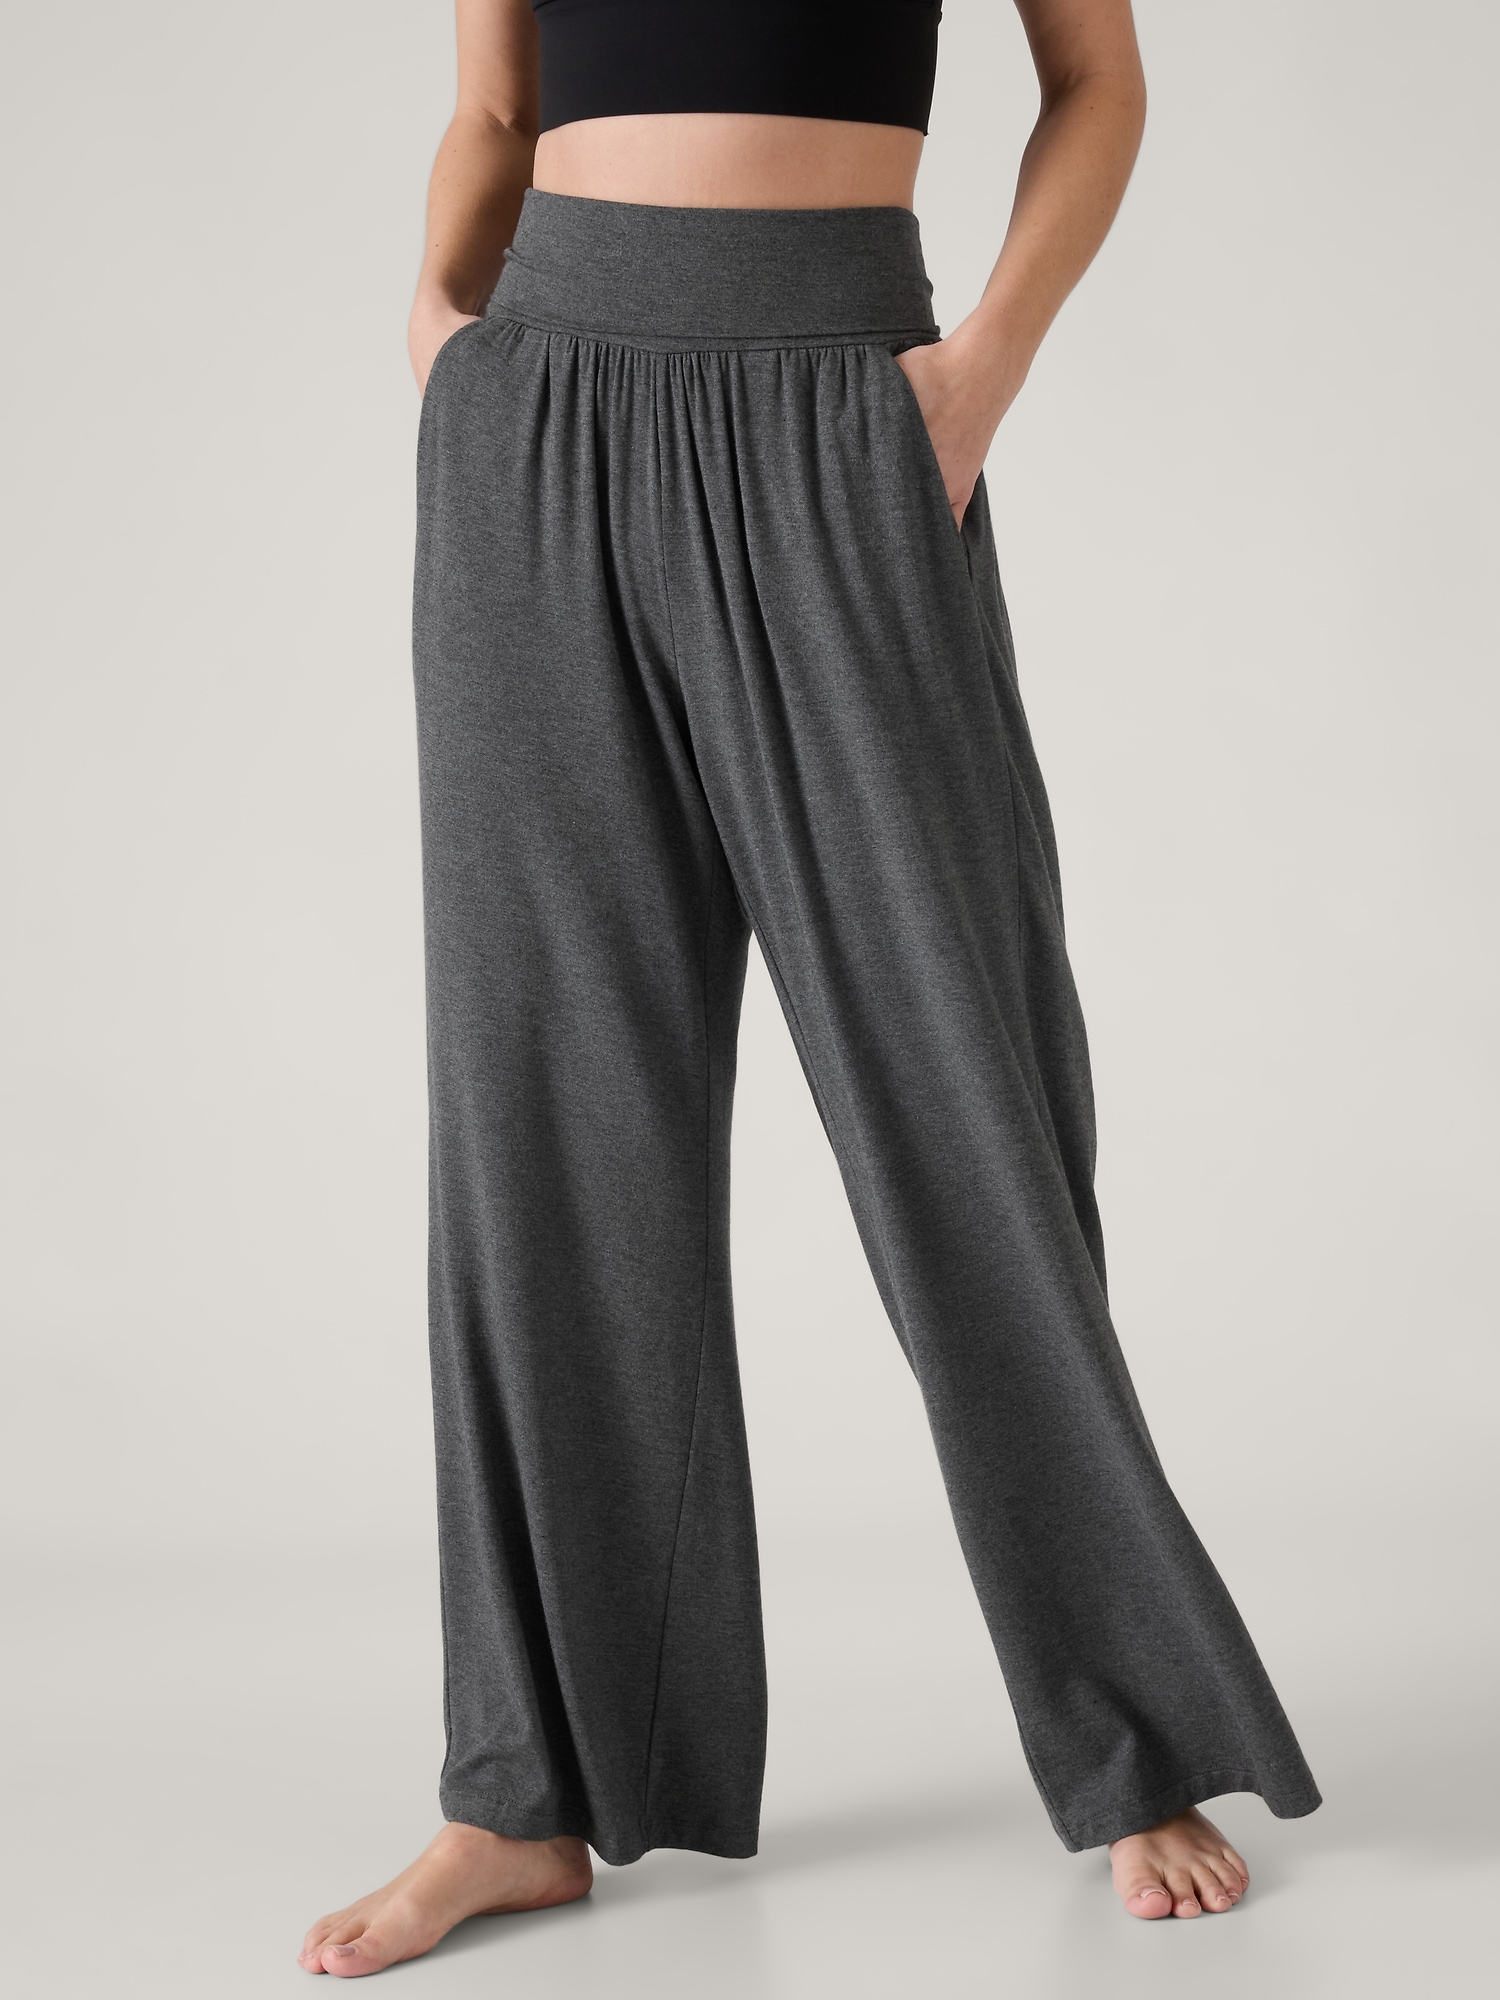 Enza® 16579 Ladies Fold Over Yoga Pant - One Stop